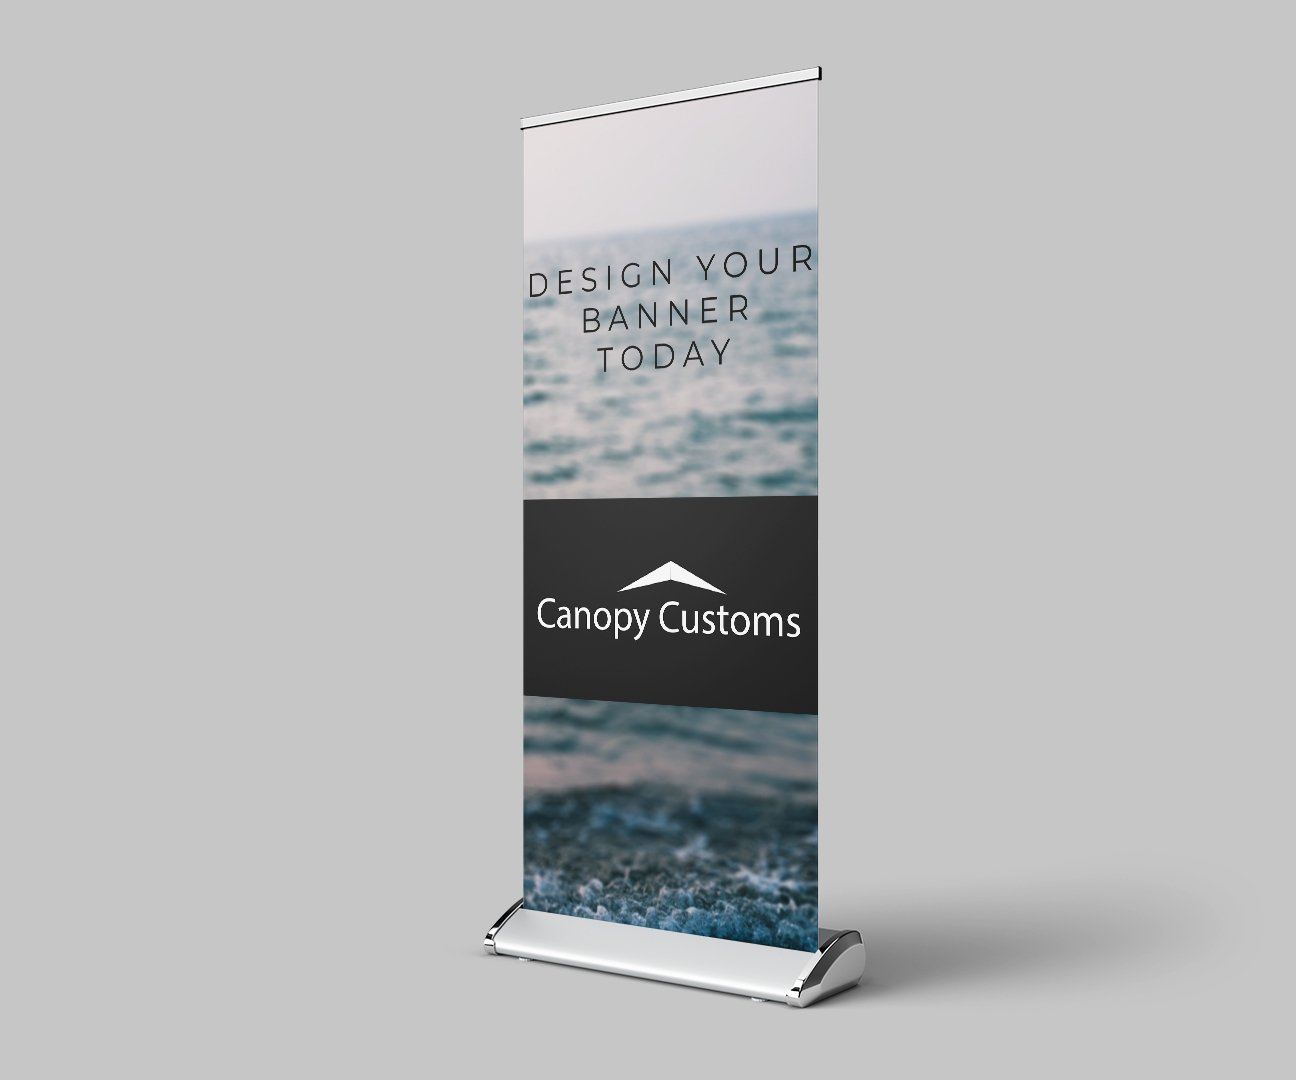 The Premium Roll-Up Banner